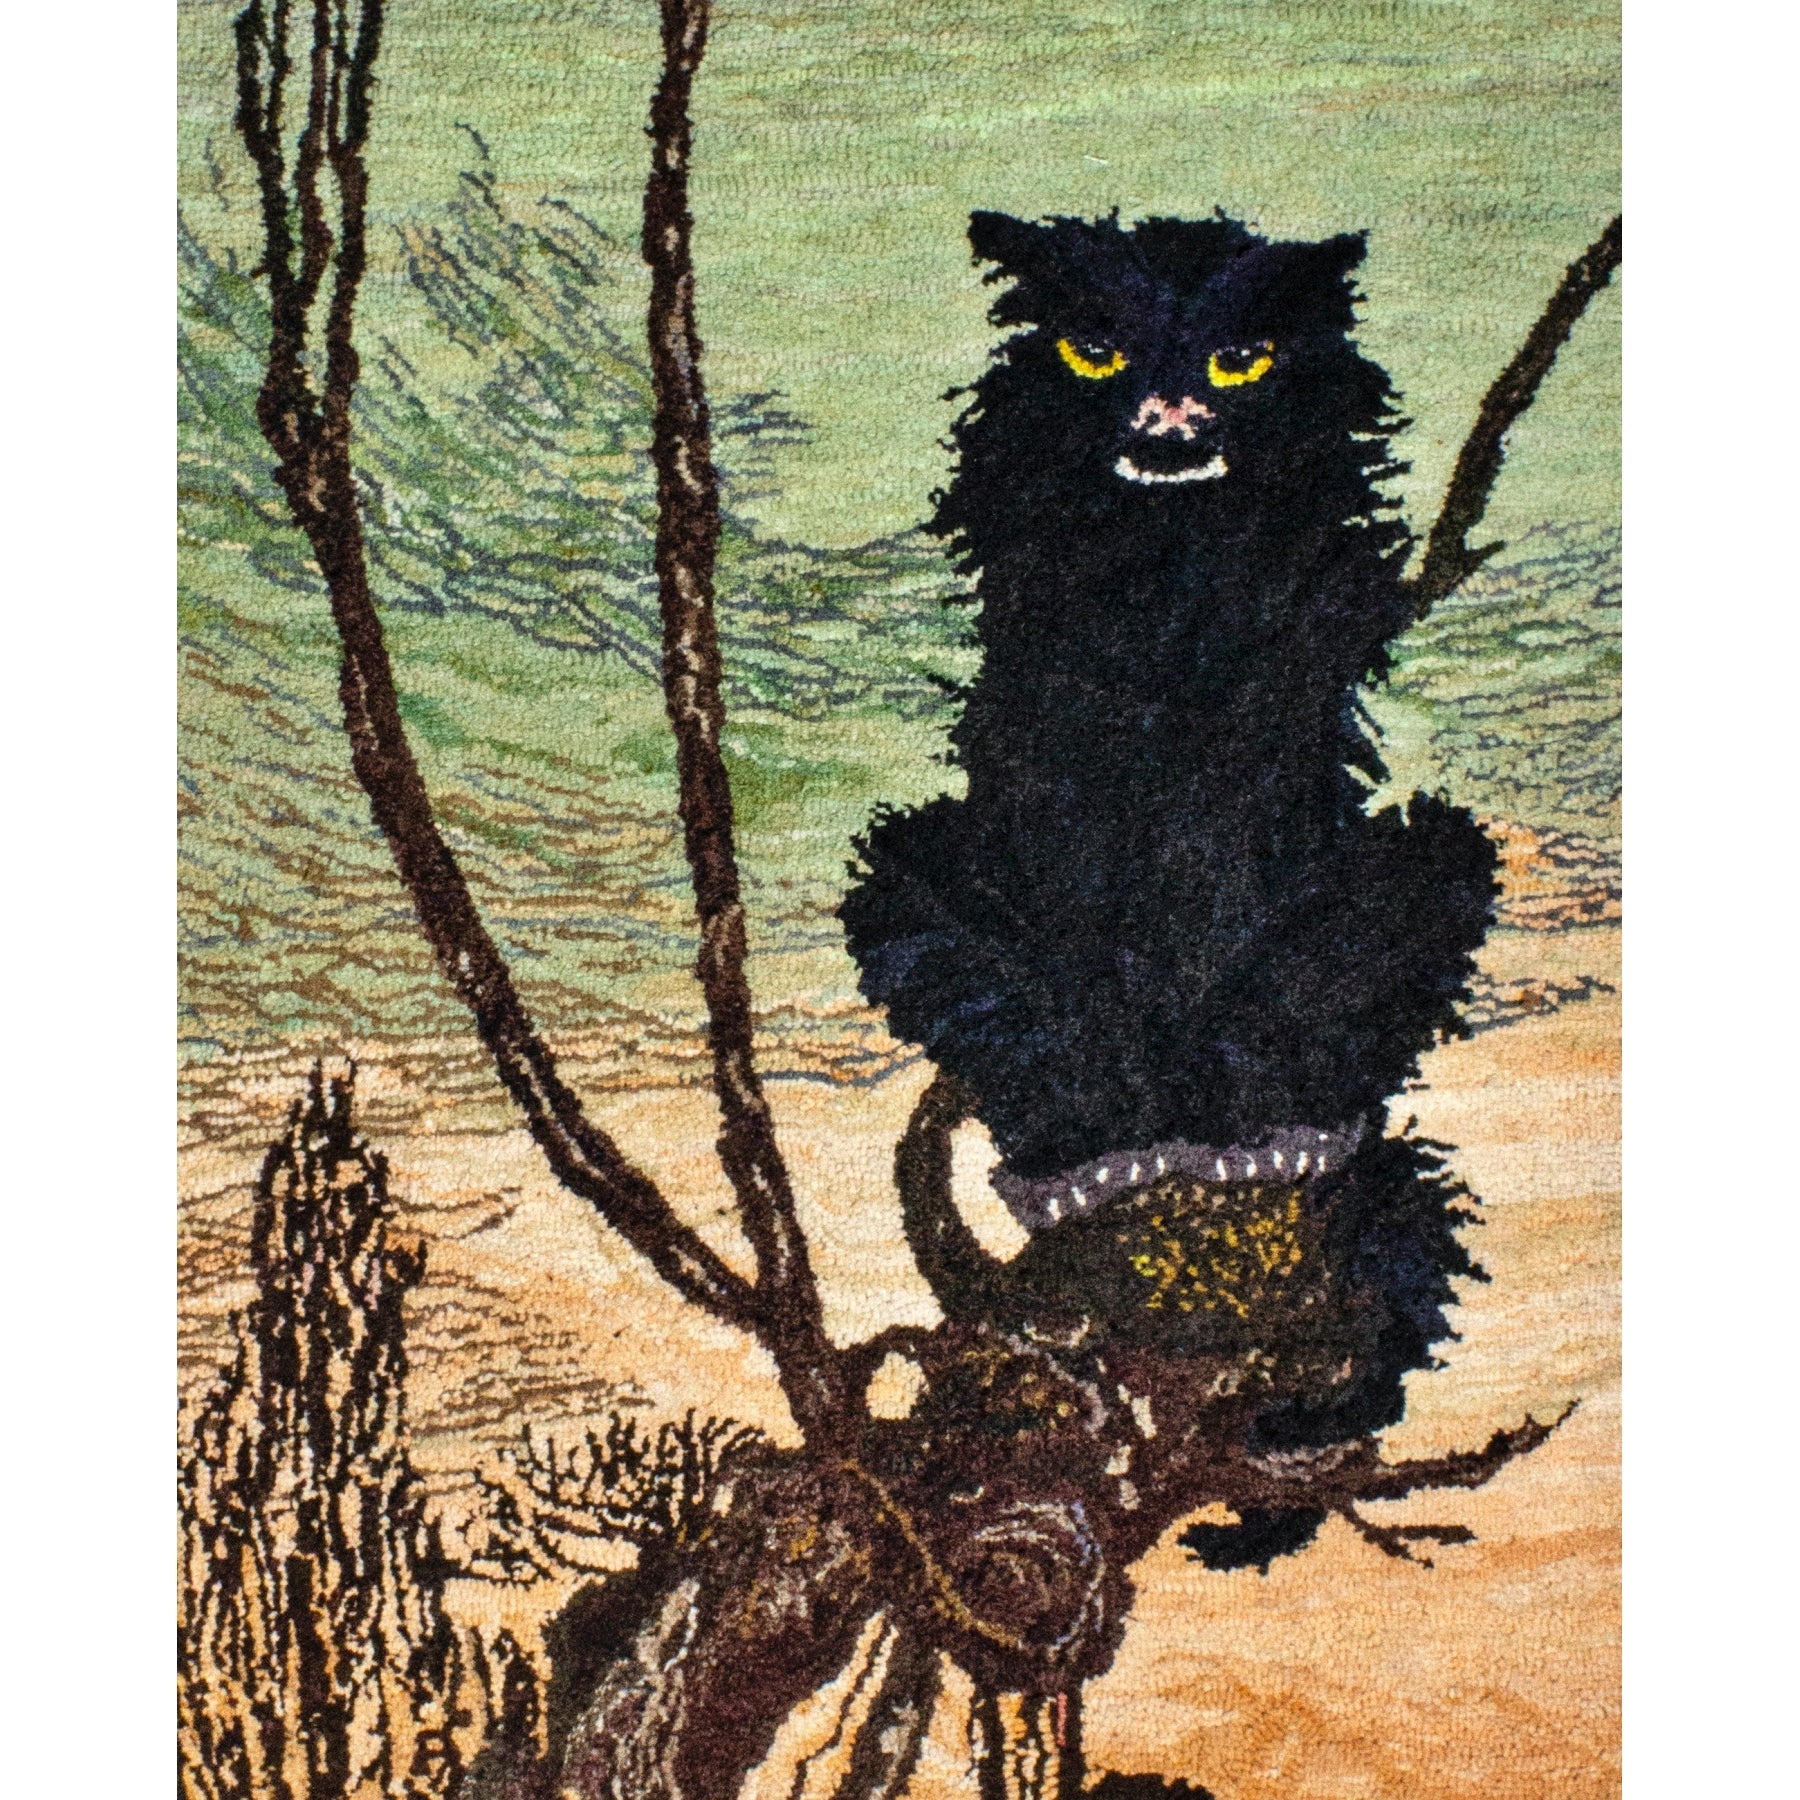 By day the witch would become a cat, ill. Arthur Rackham, 1909, rug hooked by Robin Rennie